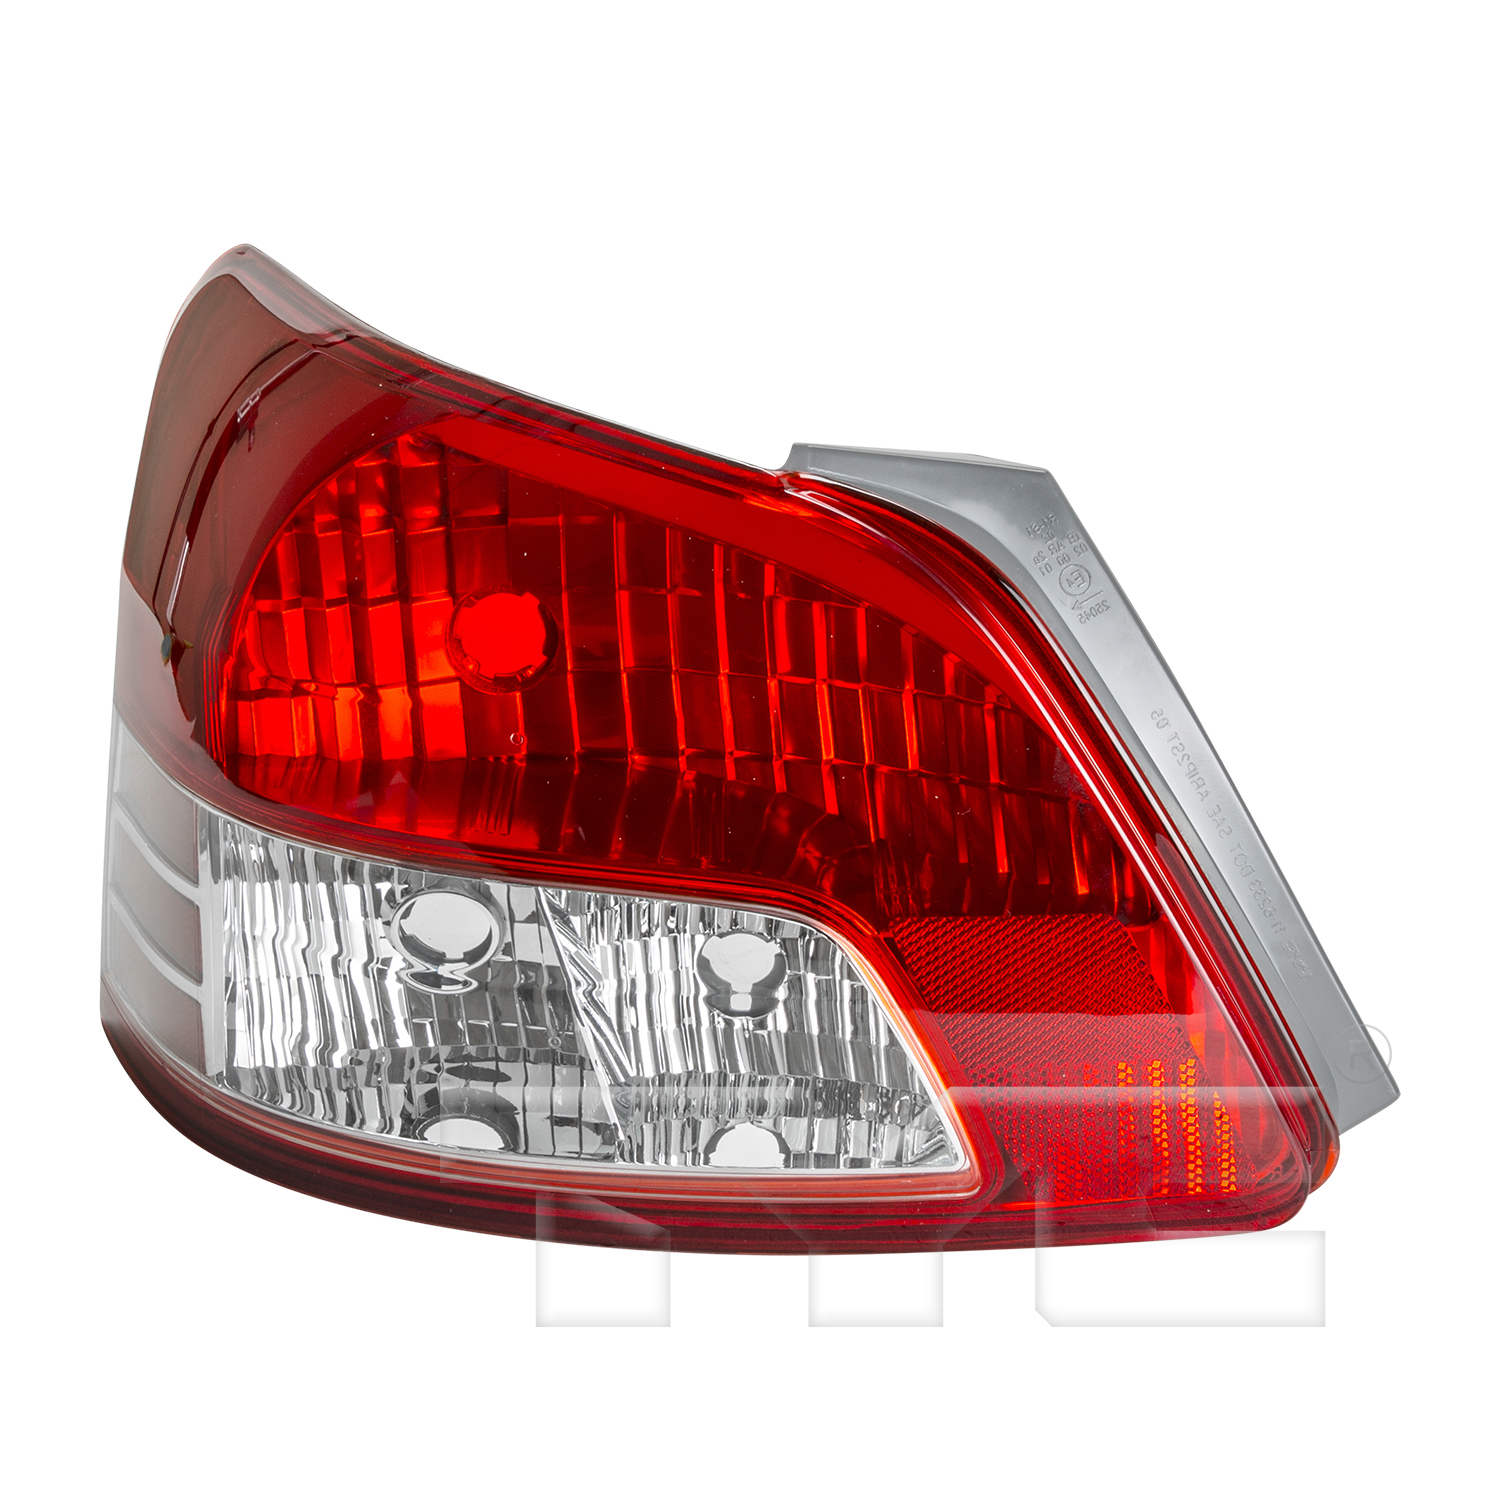 Aftermarket TAILLIGHTS for TOYOTA - YARIS, YARIS,07-12,LT Taillamp lens/housing